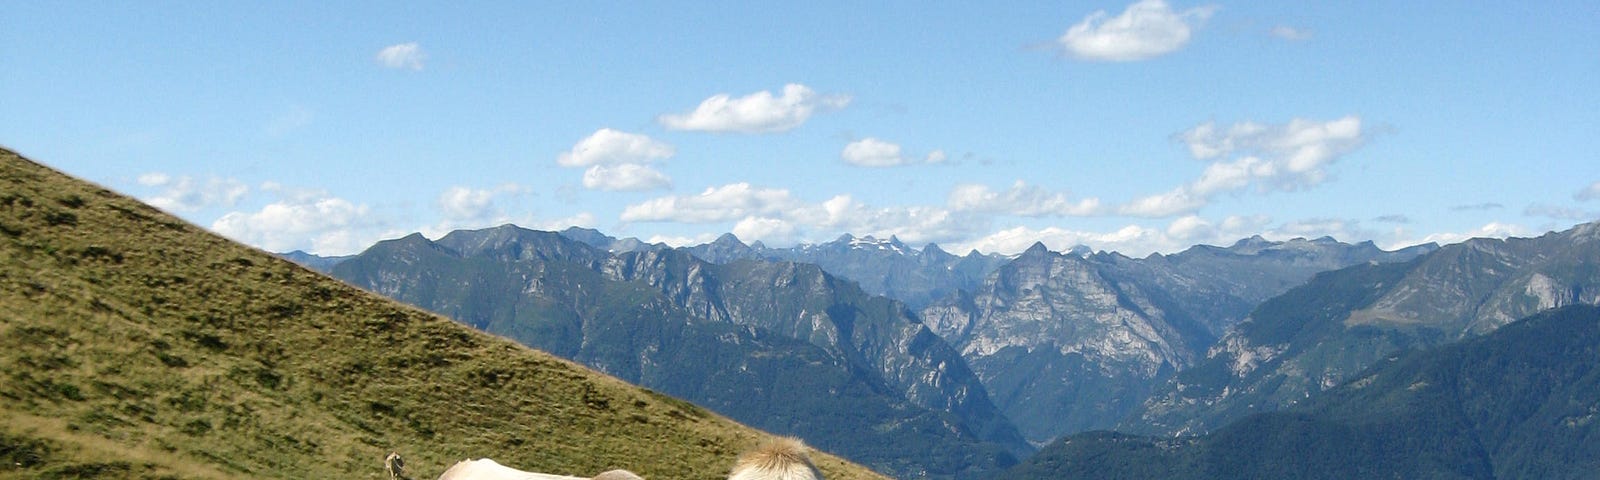 A cow grazing on the mountainside in Switzerland.